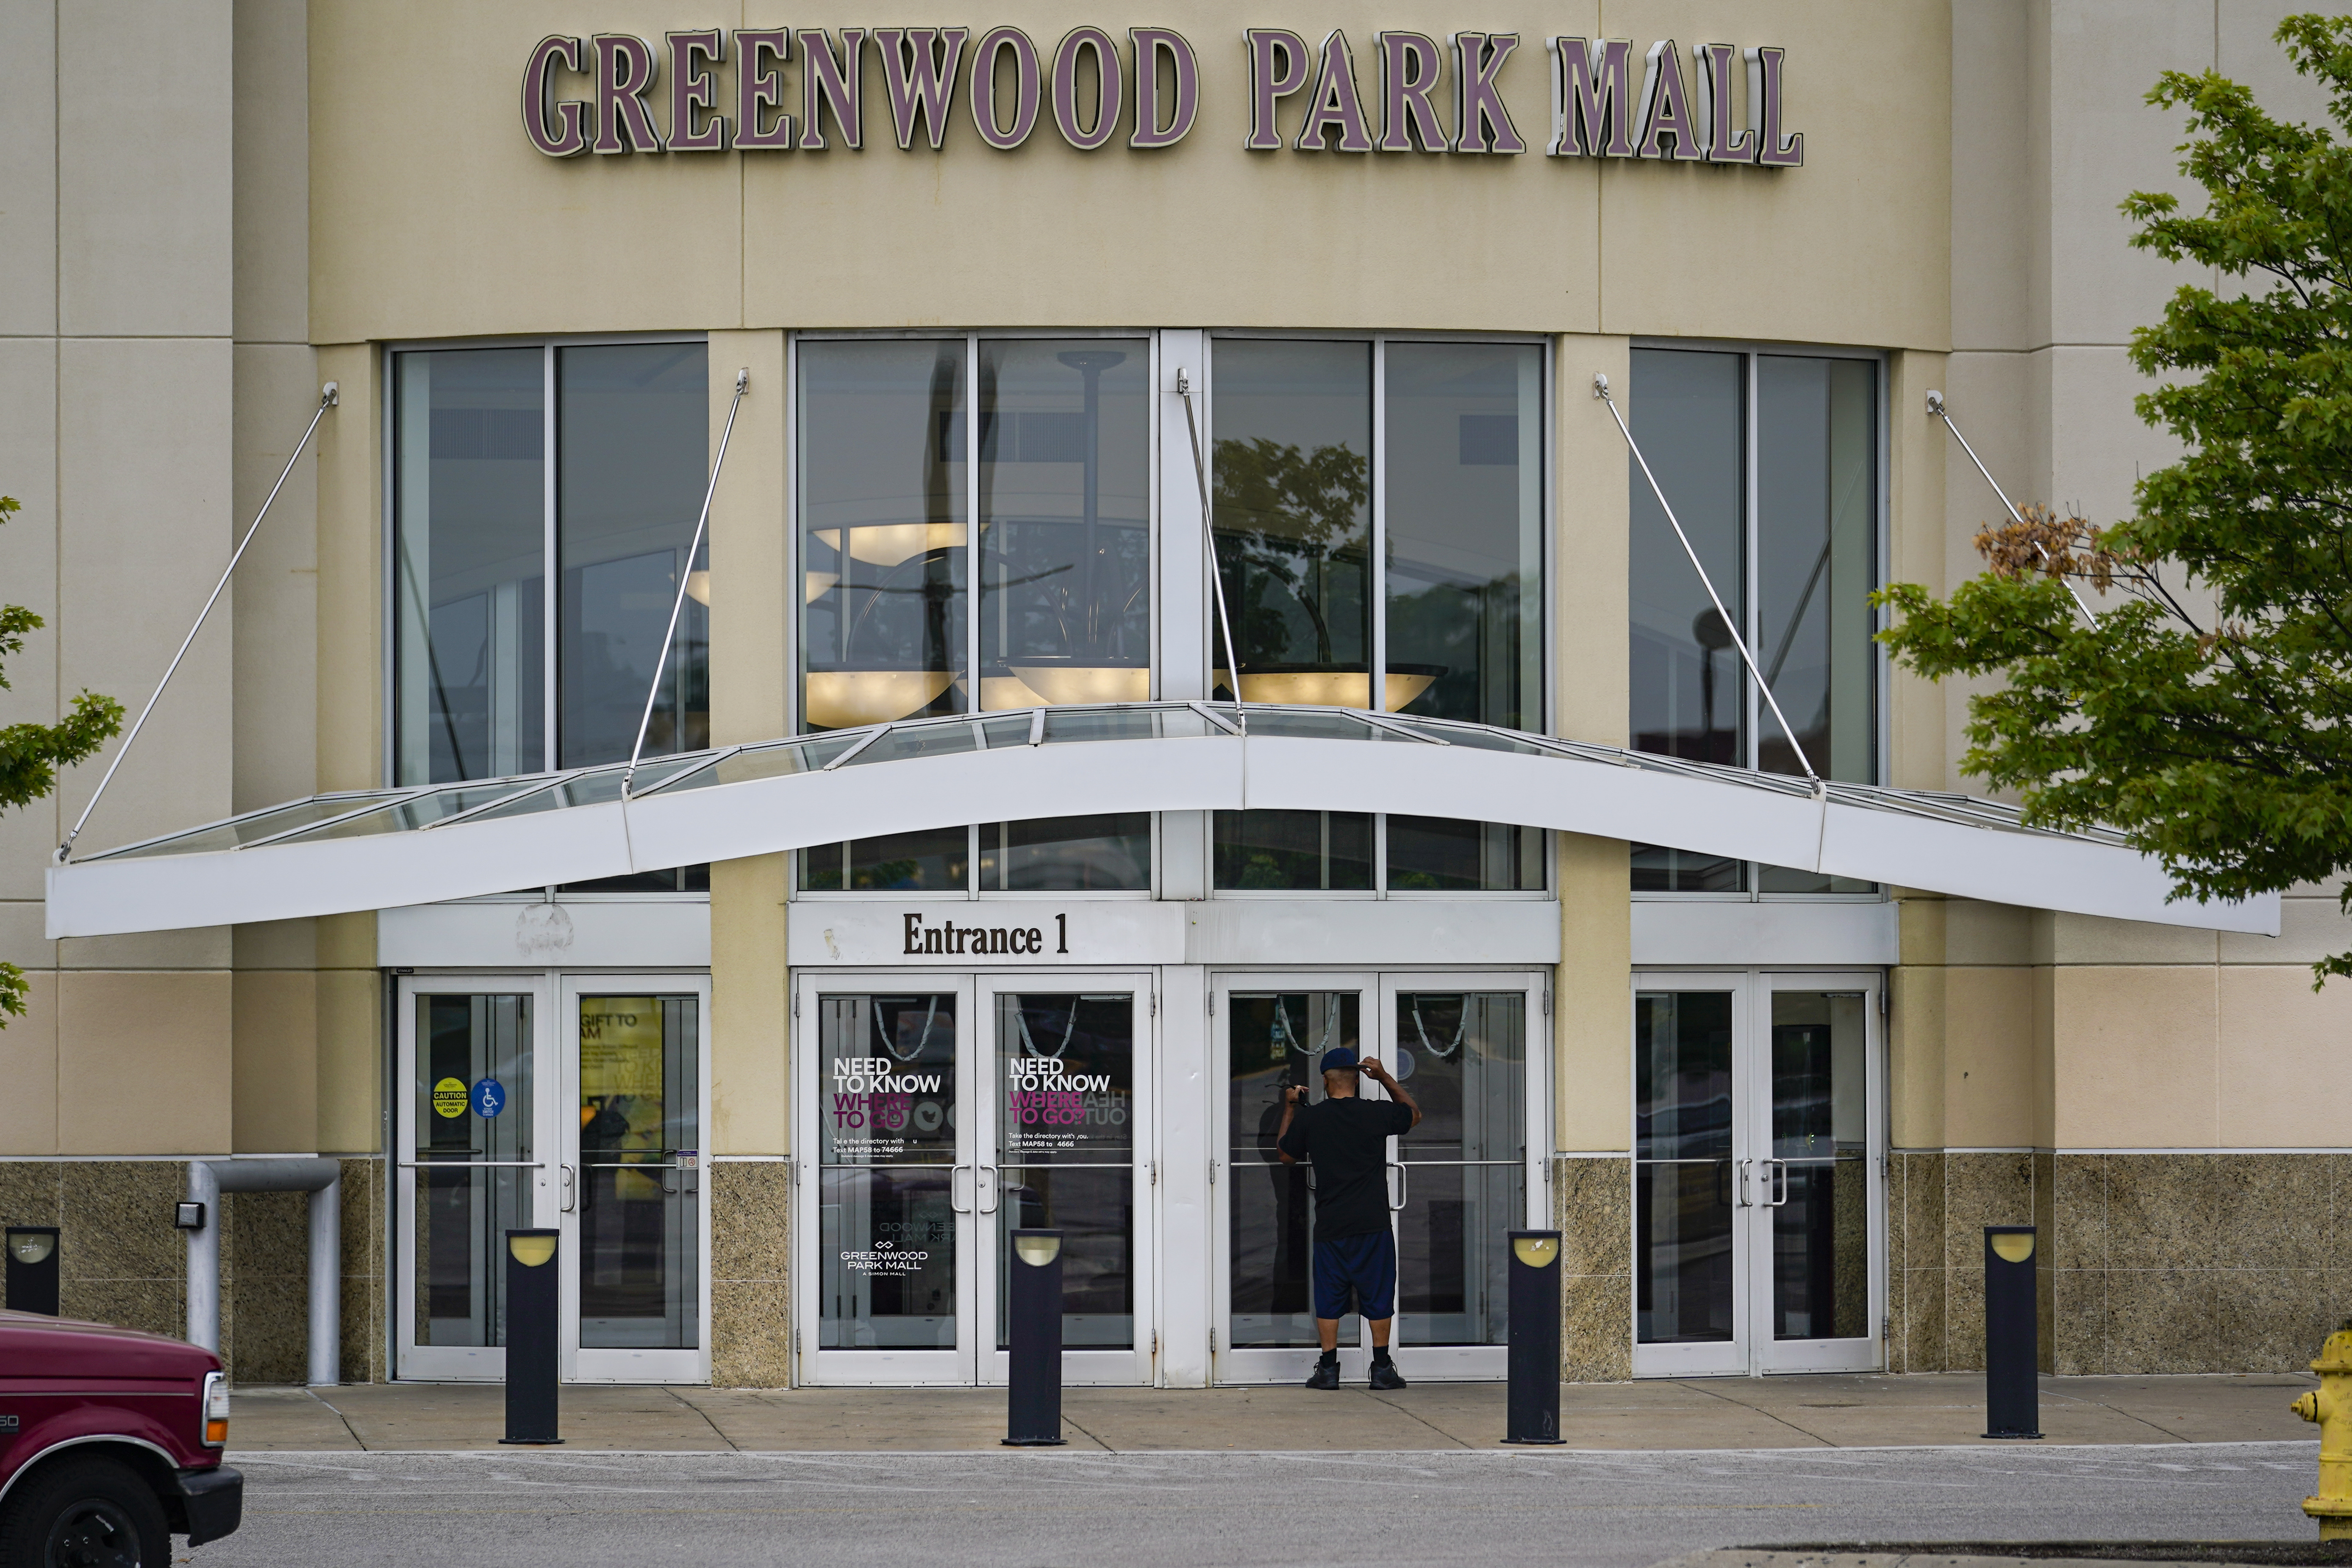 A customer checks a door on the closed Greenwood Park Mall in Greenwood, Ind., Monday, July 18, 2022. The mall was closed Monday after police say three people were fatally shot and two were injured, including a 12-year-old girl, after a man with a rifle opened fire in a food court and an armed civilian shot and killed him. (AP Photo/Michael Conroy)